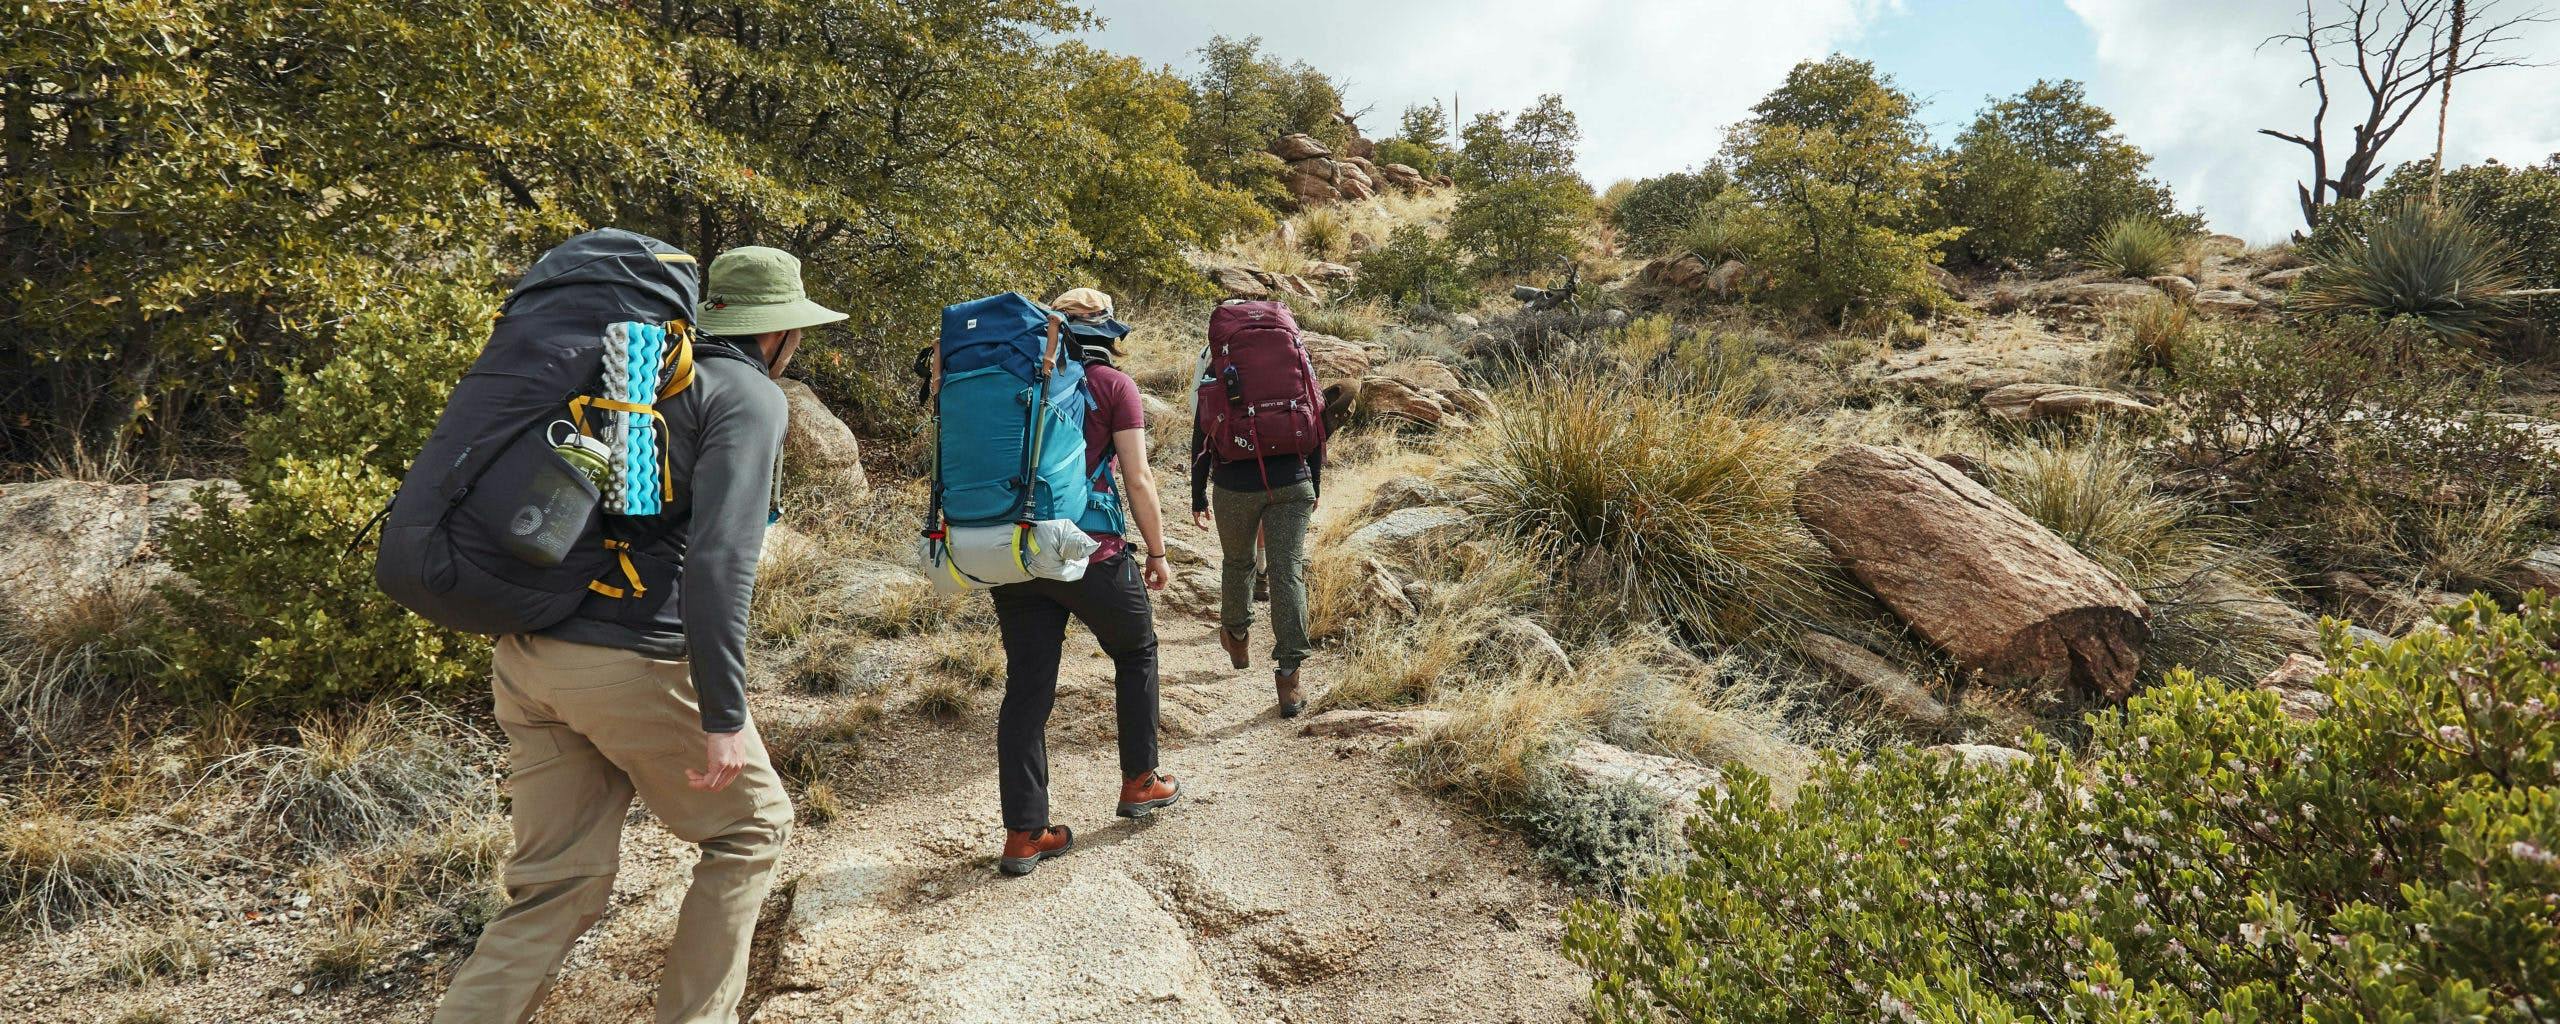 Backpacking basics: How to plan an overnight hiking trip